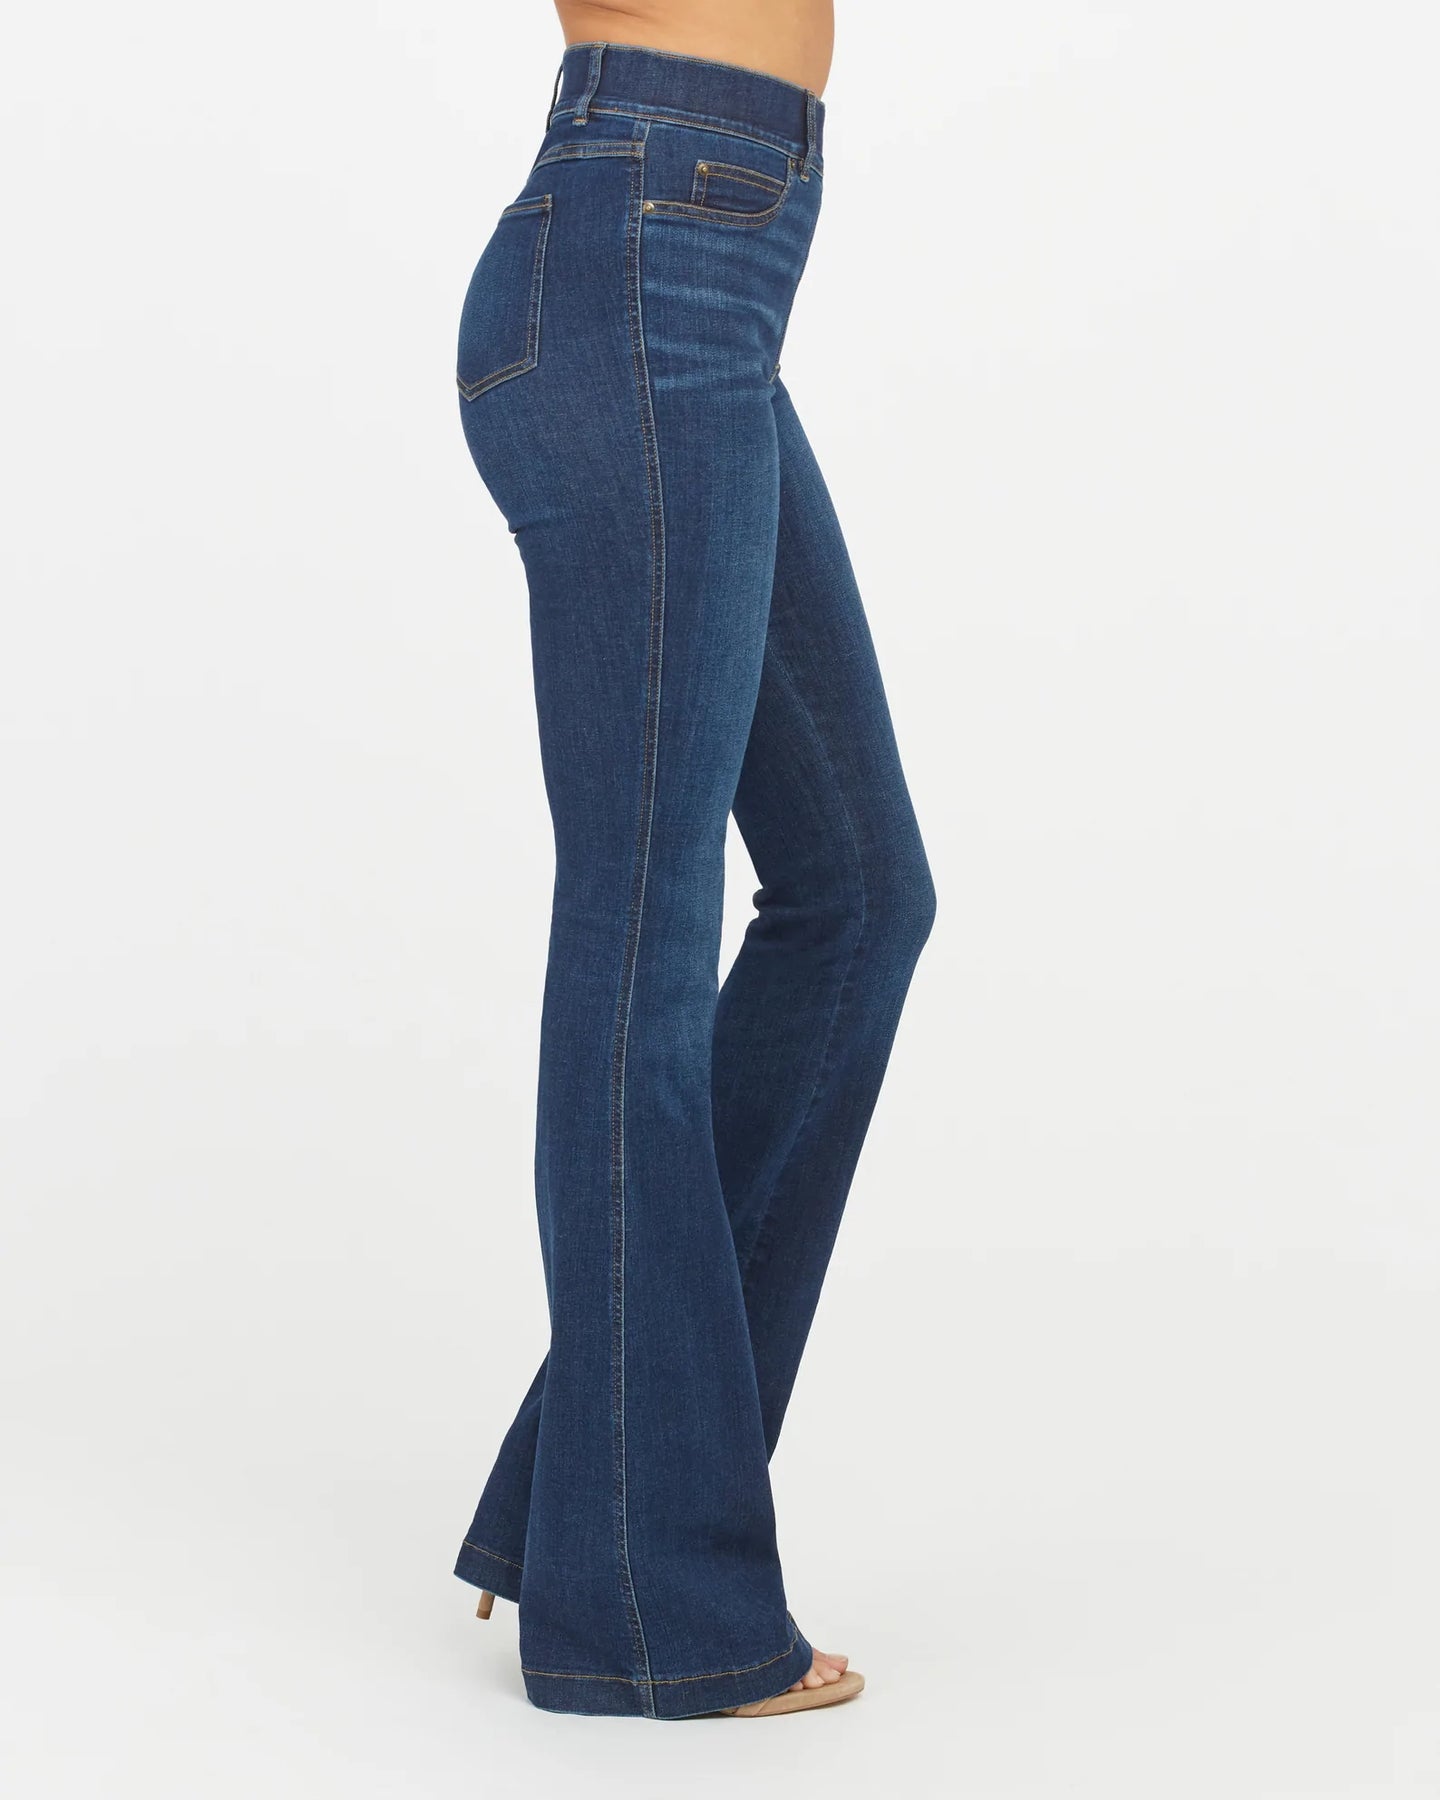 FLARE JEANS- MIDNIGHT – The Gatorbug